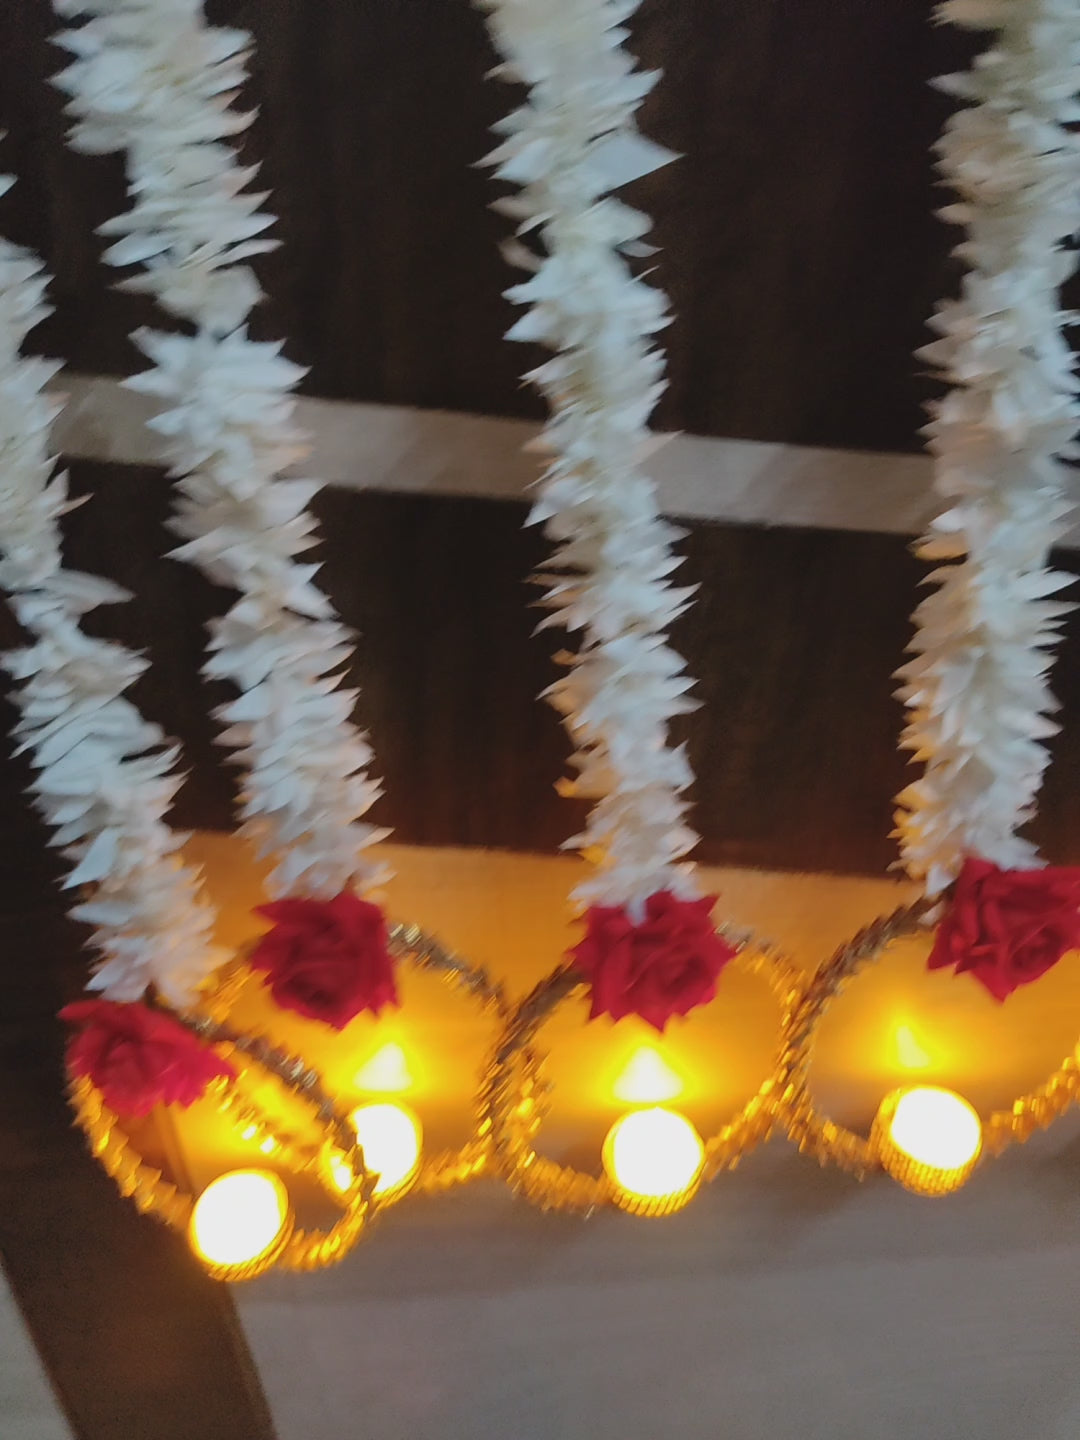 Pack of 70 Hangings at 115 Rs each (5 Feet height & No ❌candles included) Decorative Round Hanging Gota candle holder stand attached to jasmine & rose garlands / decoration for diwali 🔆 & navratri festive events